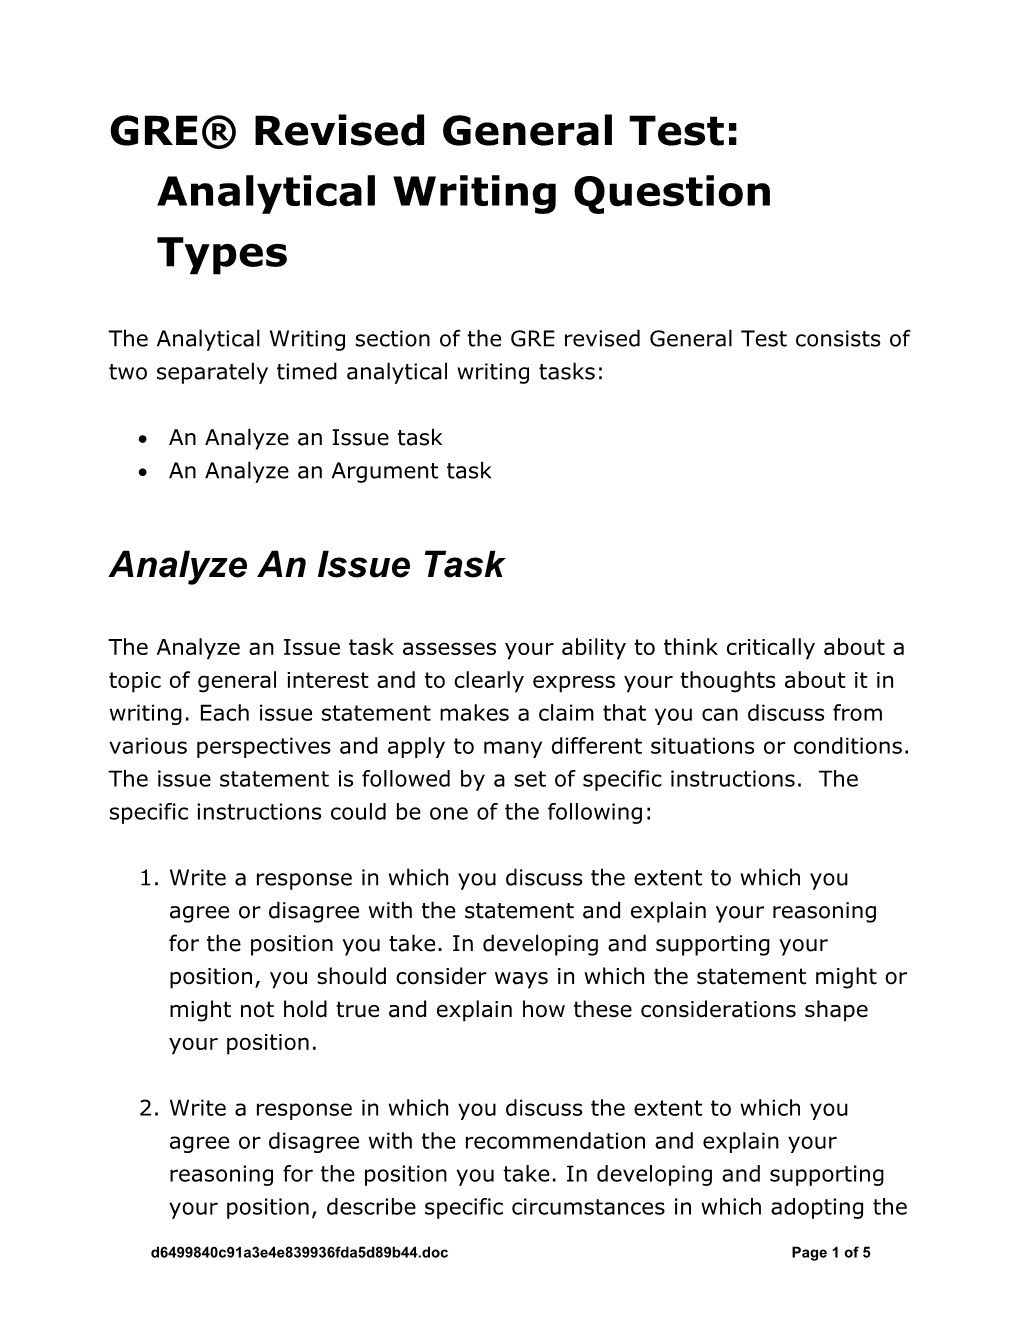 The Analyze an Issue Task Assesses Your Ability to Think Critically About a Topic of General